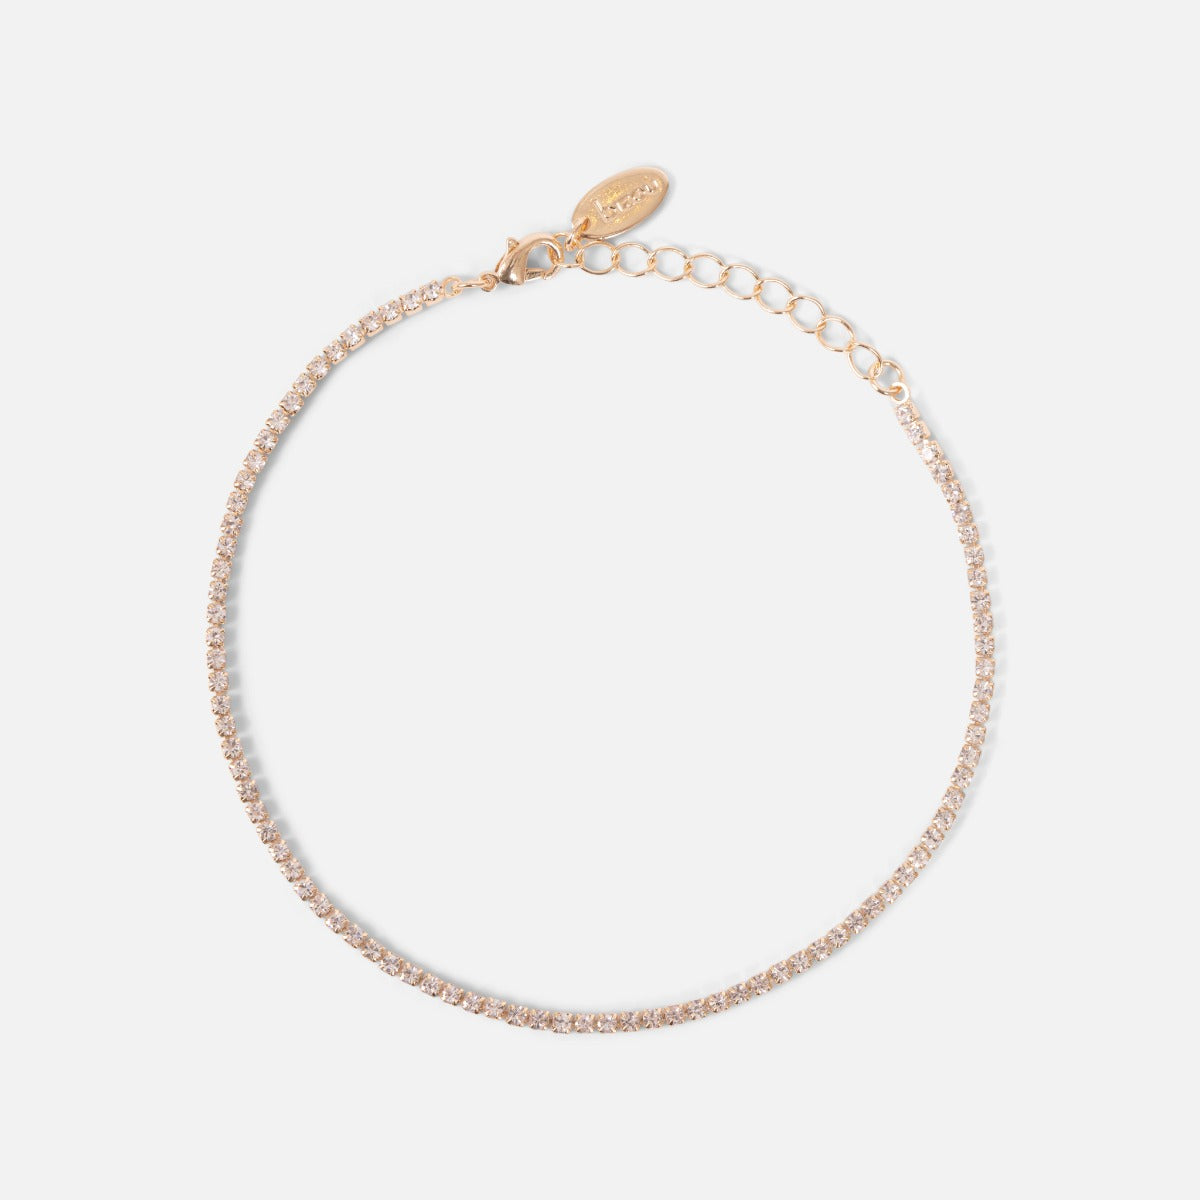 Thin golden ankle chain with small sparkling stones